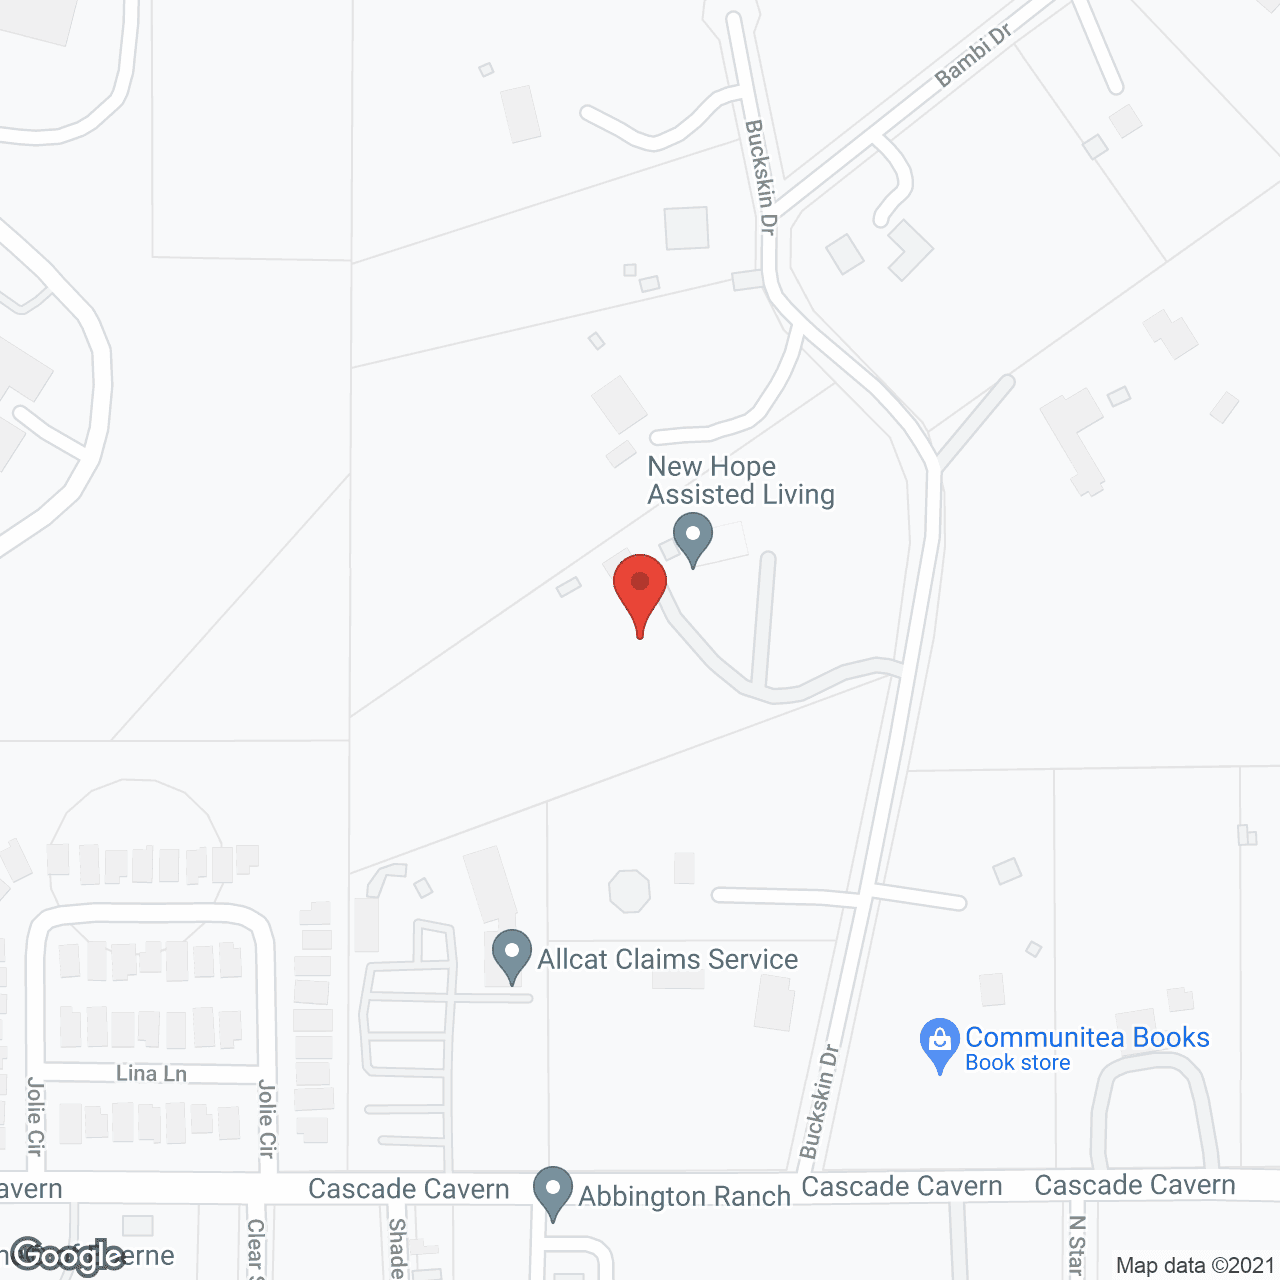 New Hope Assisted Living in google map